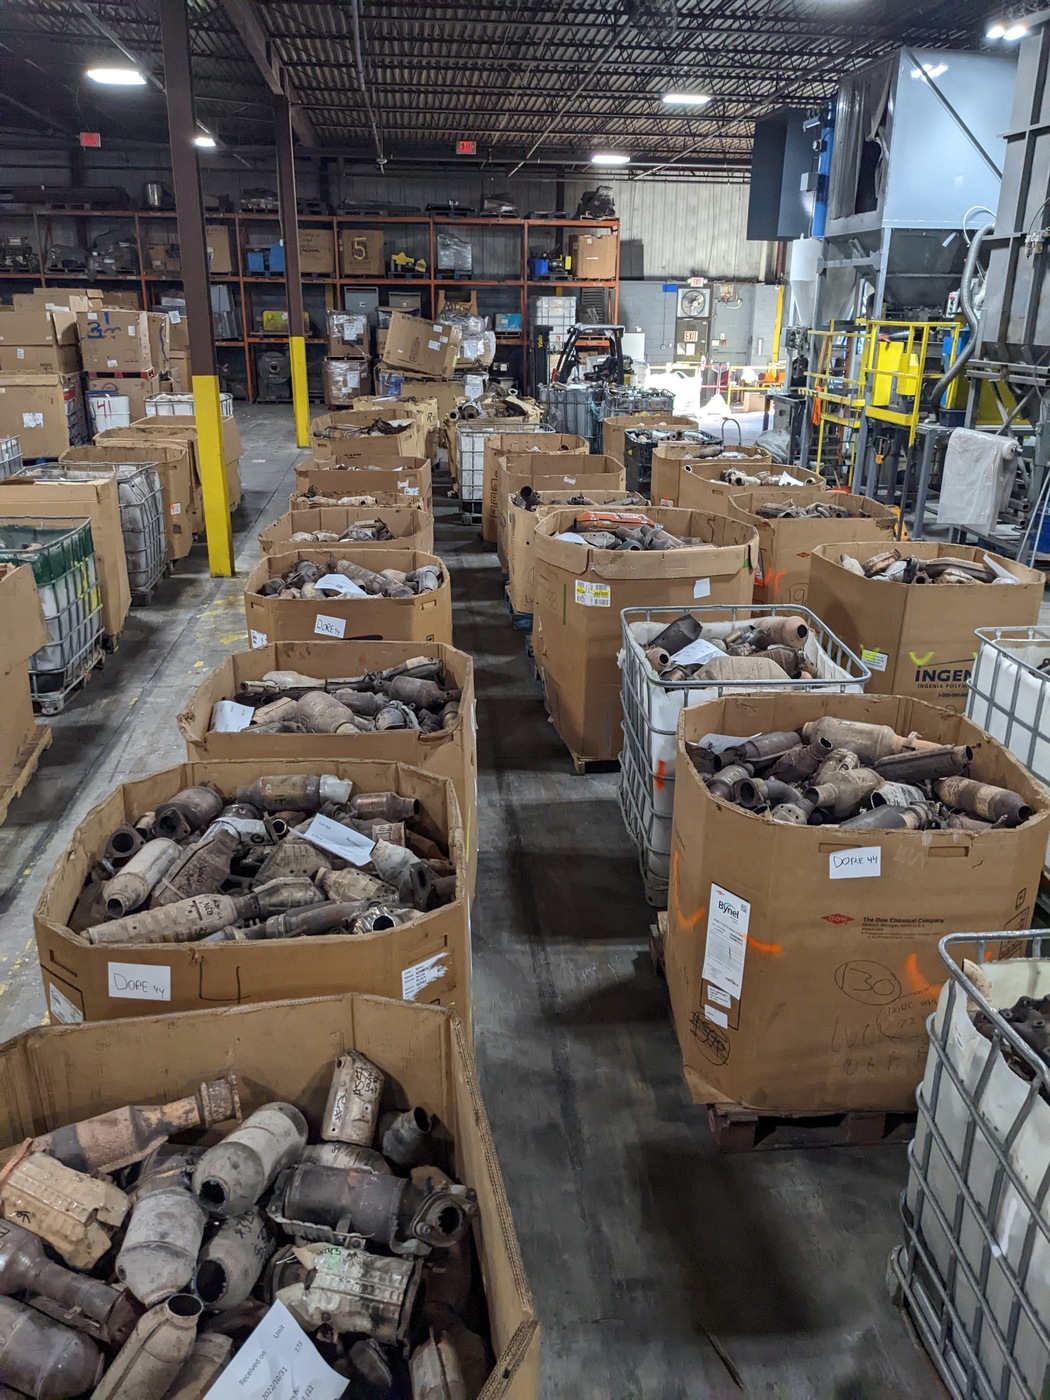 As part of a nationwide takedown, FBI agents collected thousands of catalytic converters from junk yards and cut them to make them appear stolen. They then offered them up for sale. At the time of the takedown, seizures, and arrests, one suspect had amassed multiple pallets of catalytic converters (pictured), which were first shipped to a refinery and eventually overseas for recycling purposes.